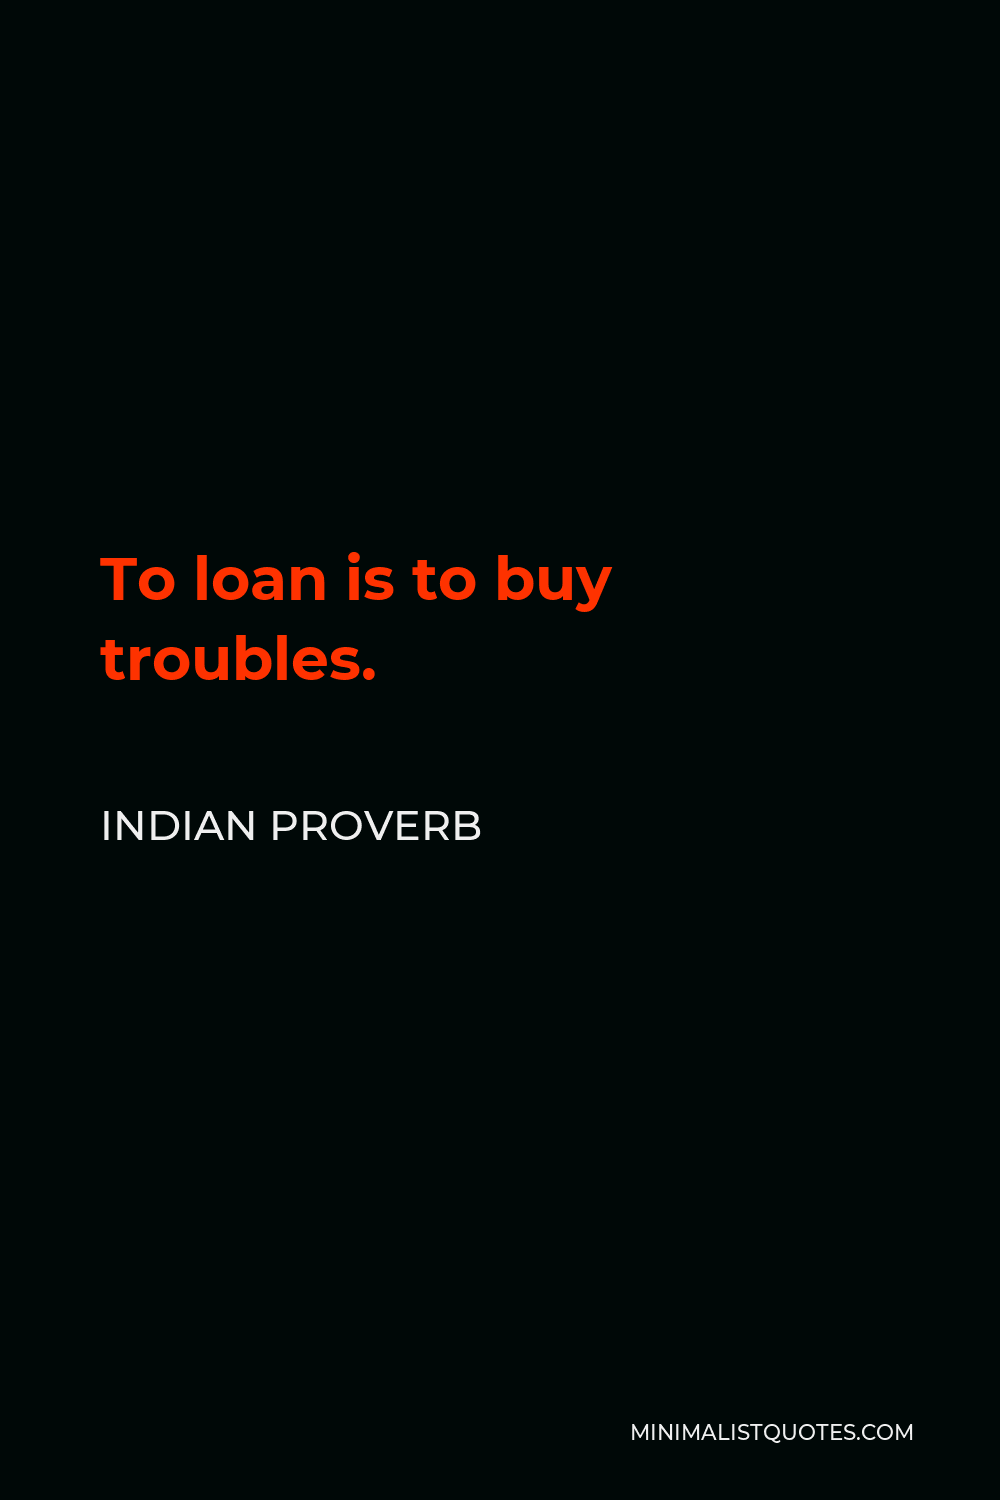 Indian Proverb Quote - To loan is to buy troubles.